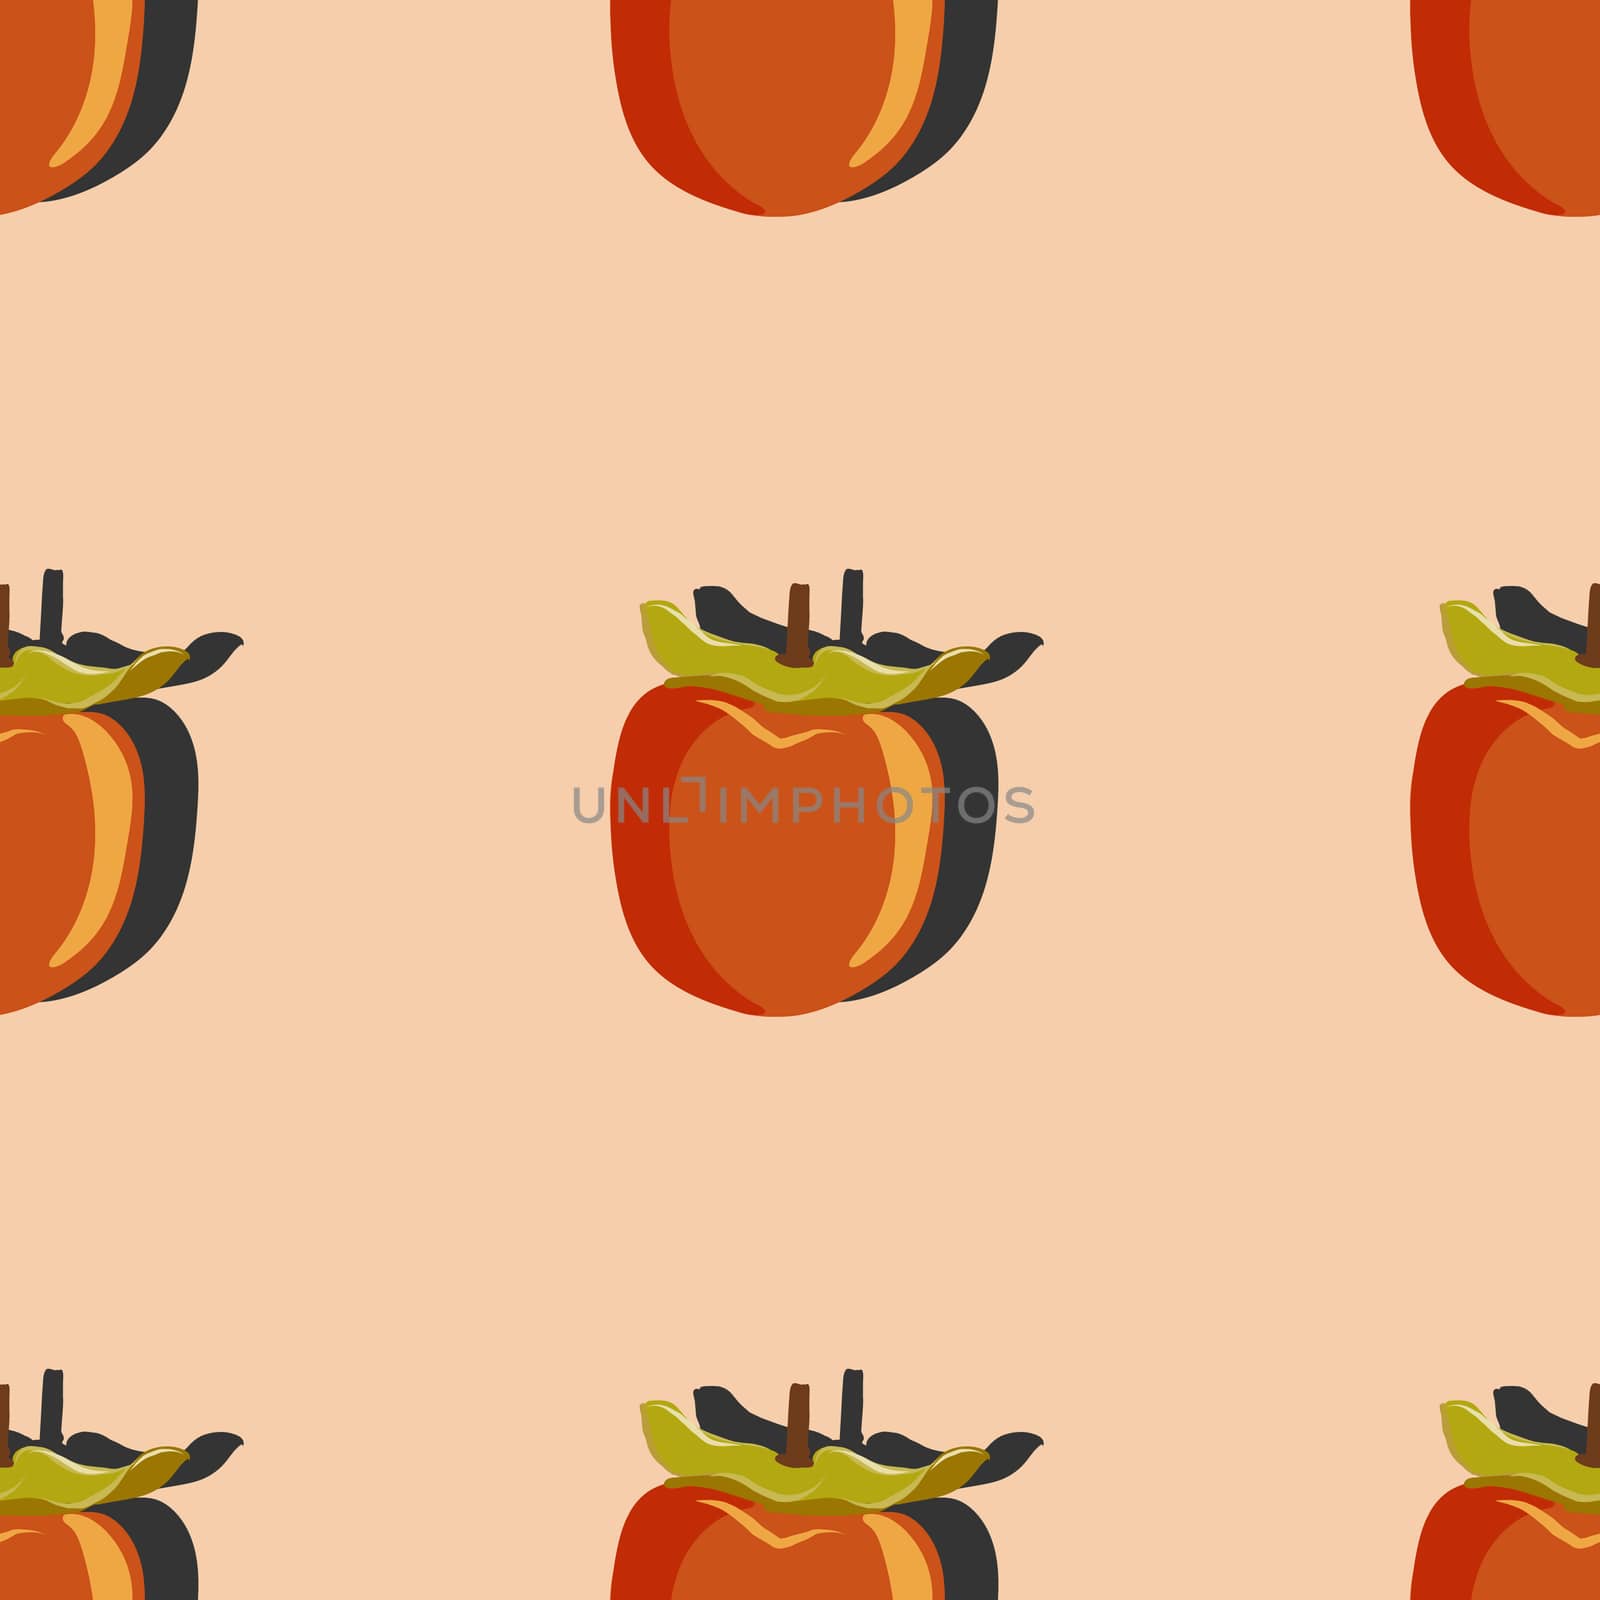 Sharon fruit top view with shadow pop art seamless pattern on a orange background. Persimmon endless pattern vector illustration, design for wallpapers, fabrics, textiles, packaging.